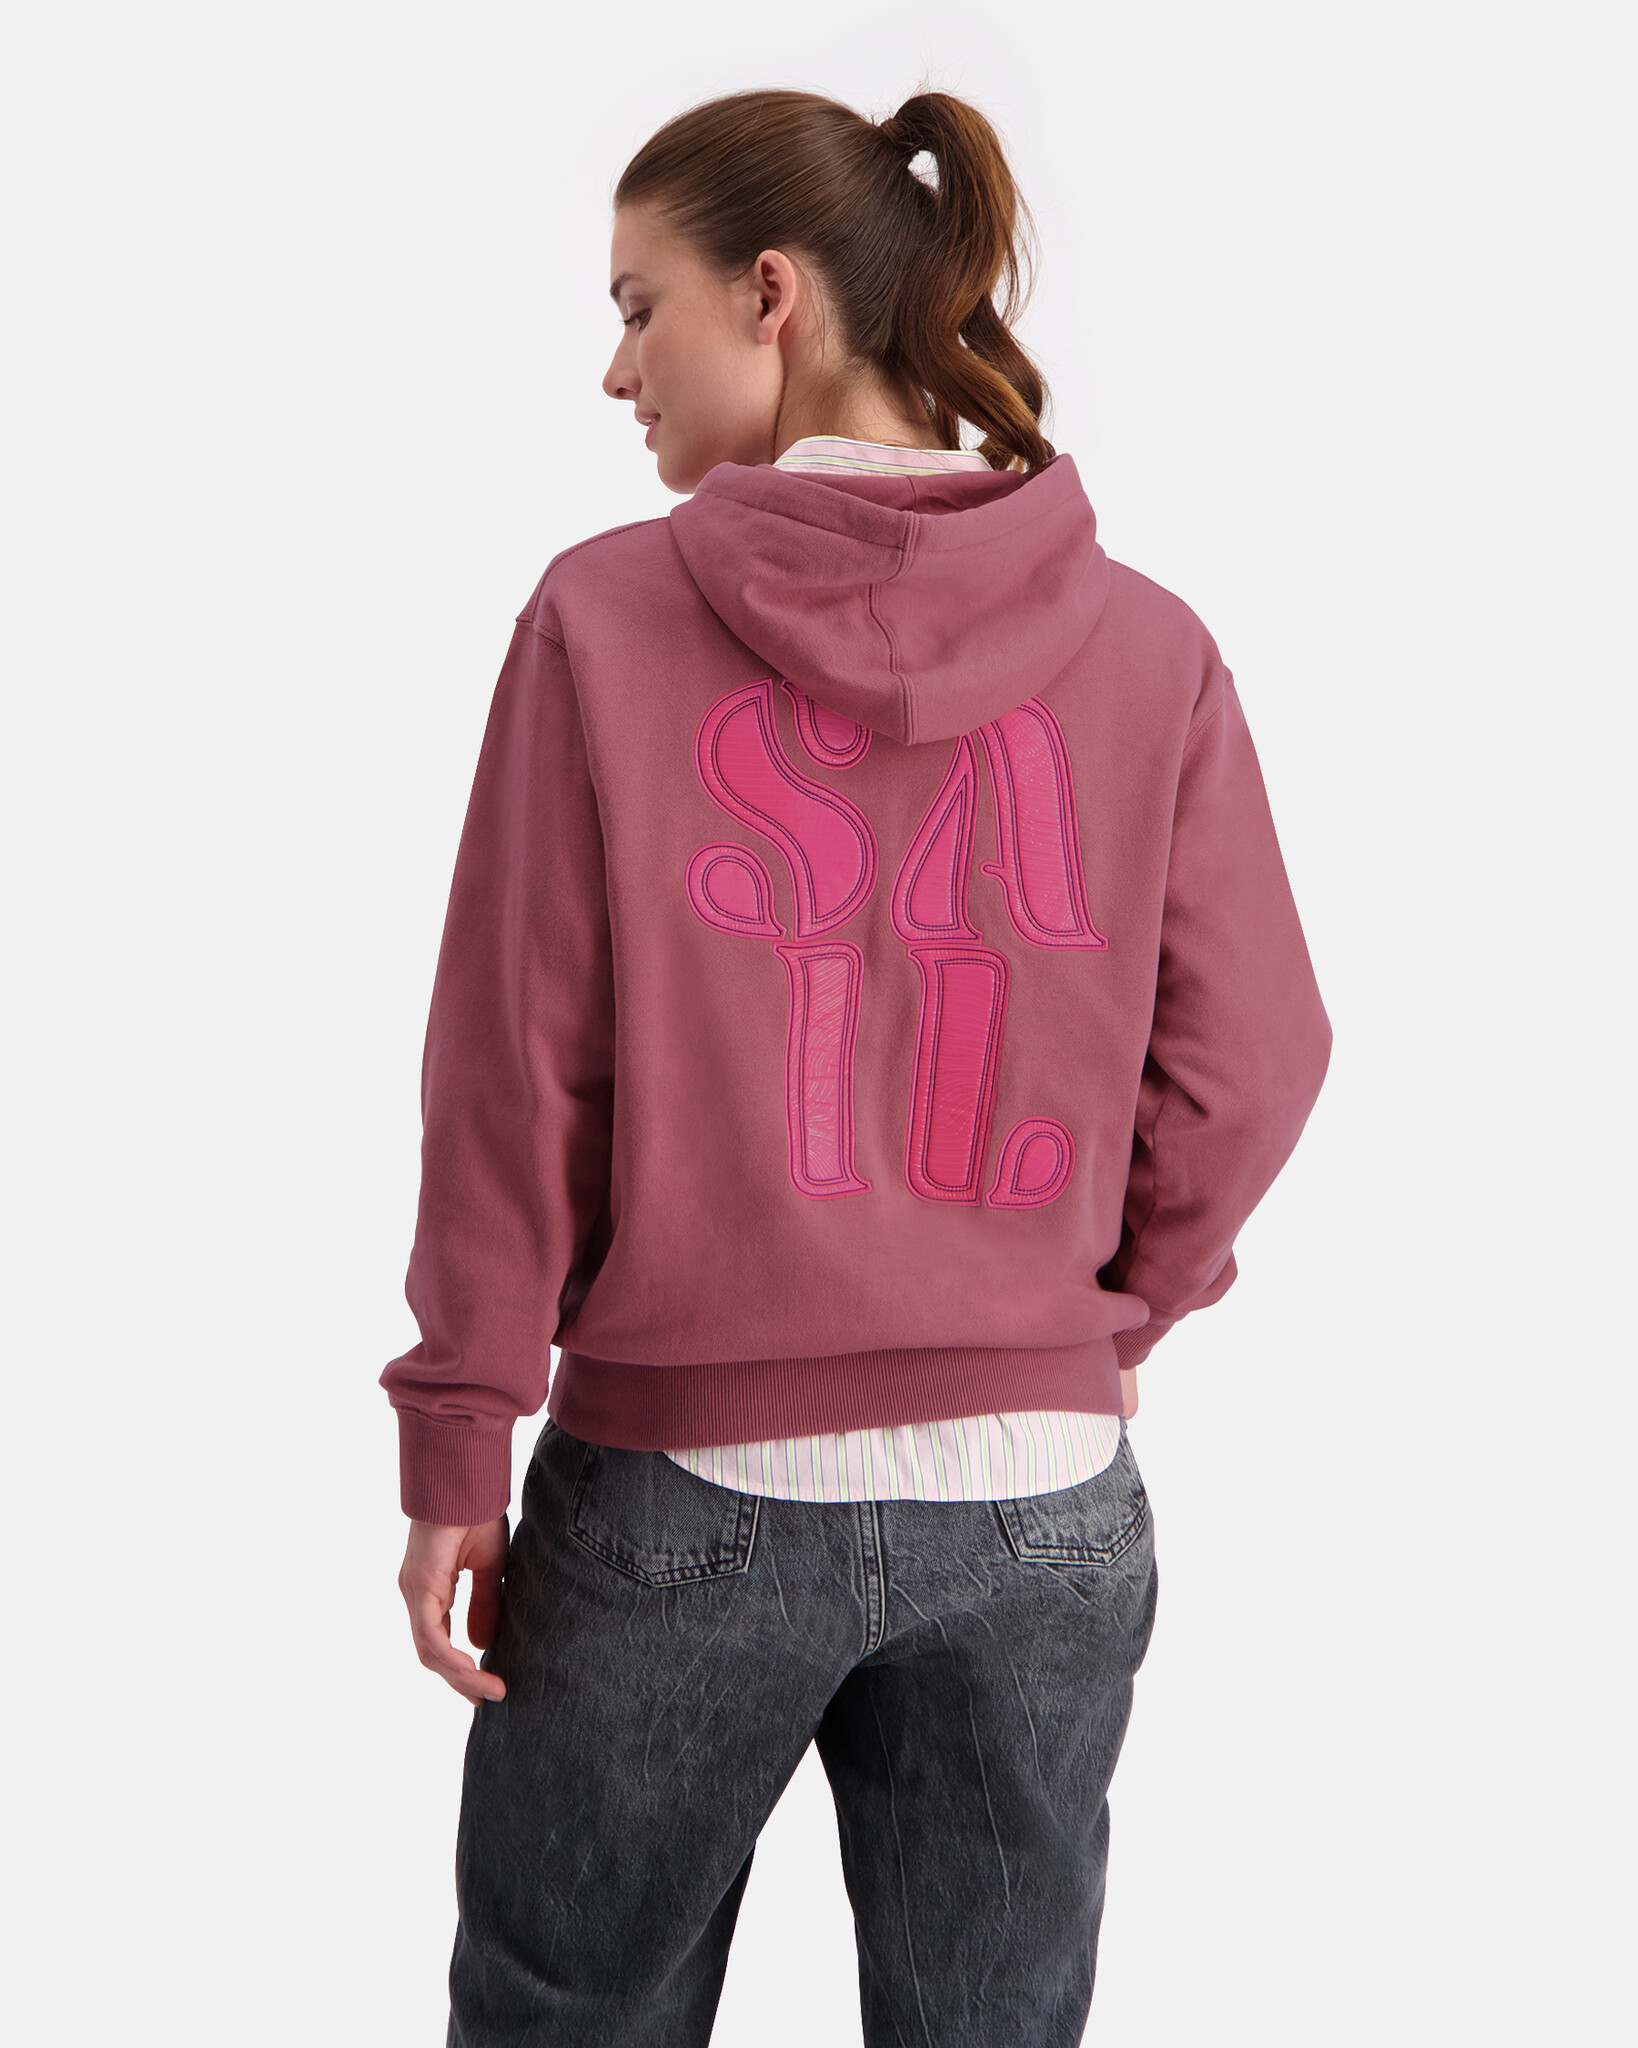 Hooded sweater with dropped shoulders and artwork on back